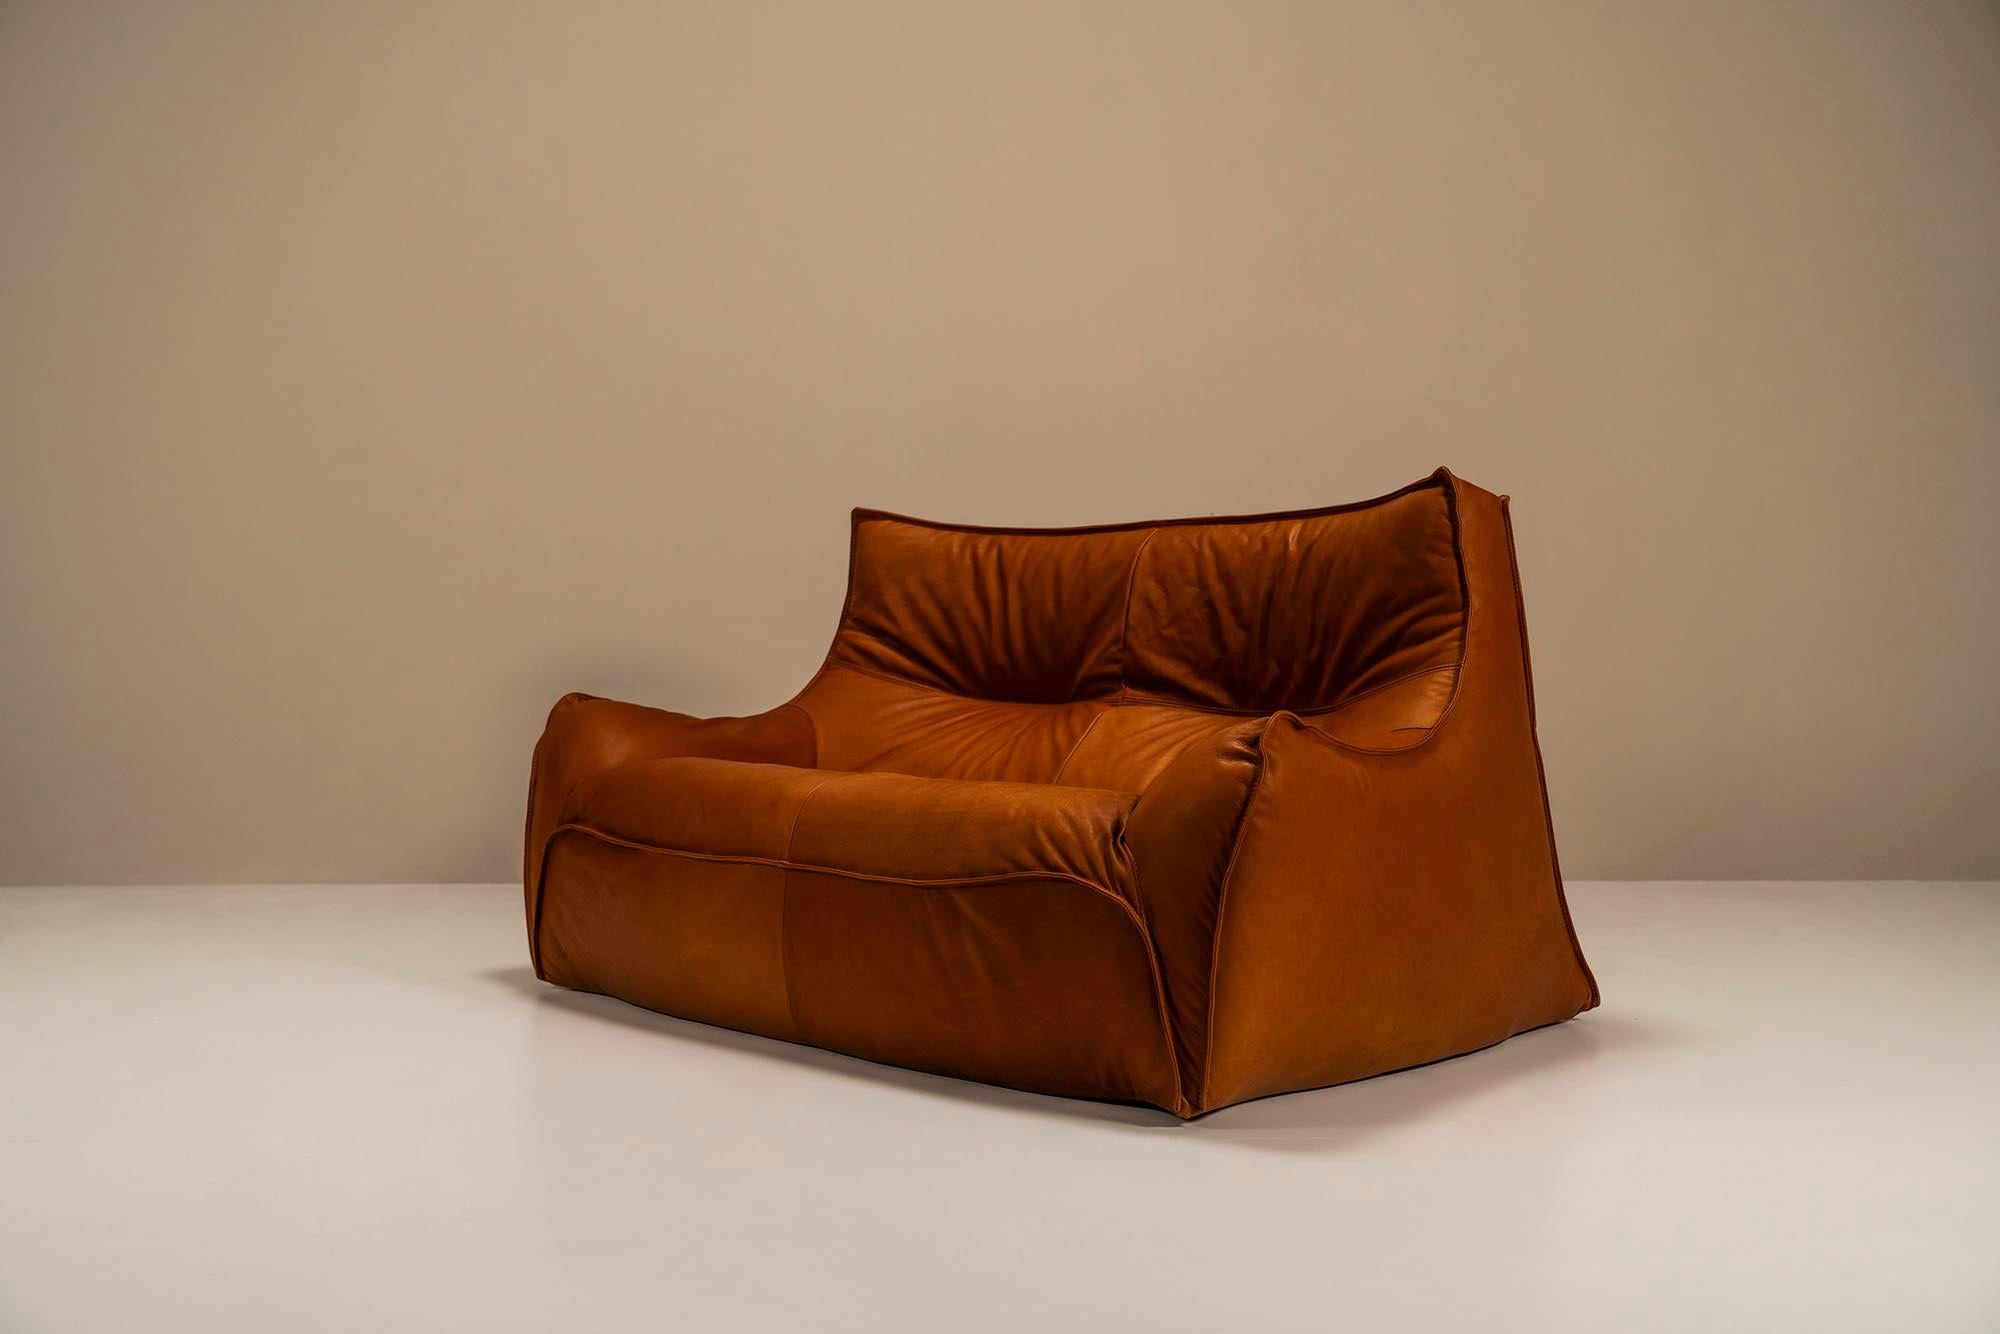 Two-Seater Sofa Model “Satan” By Bernard Govin For Ligne RosetThe French designer Bernard Govin is known for his wide range of futuristic designs for, for example, Ligne Roset. Far ahead of its time even at the time, some of its designs, such as the